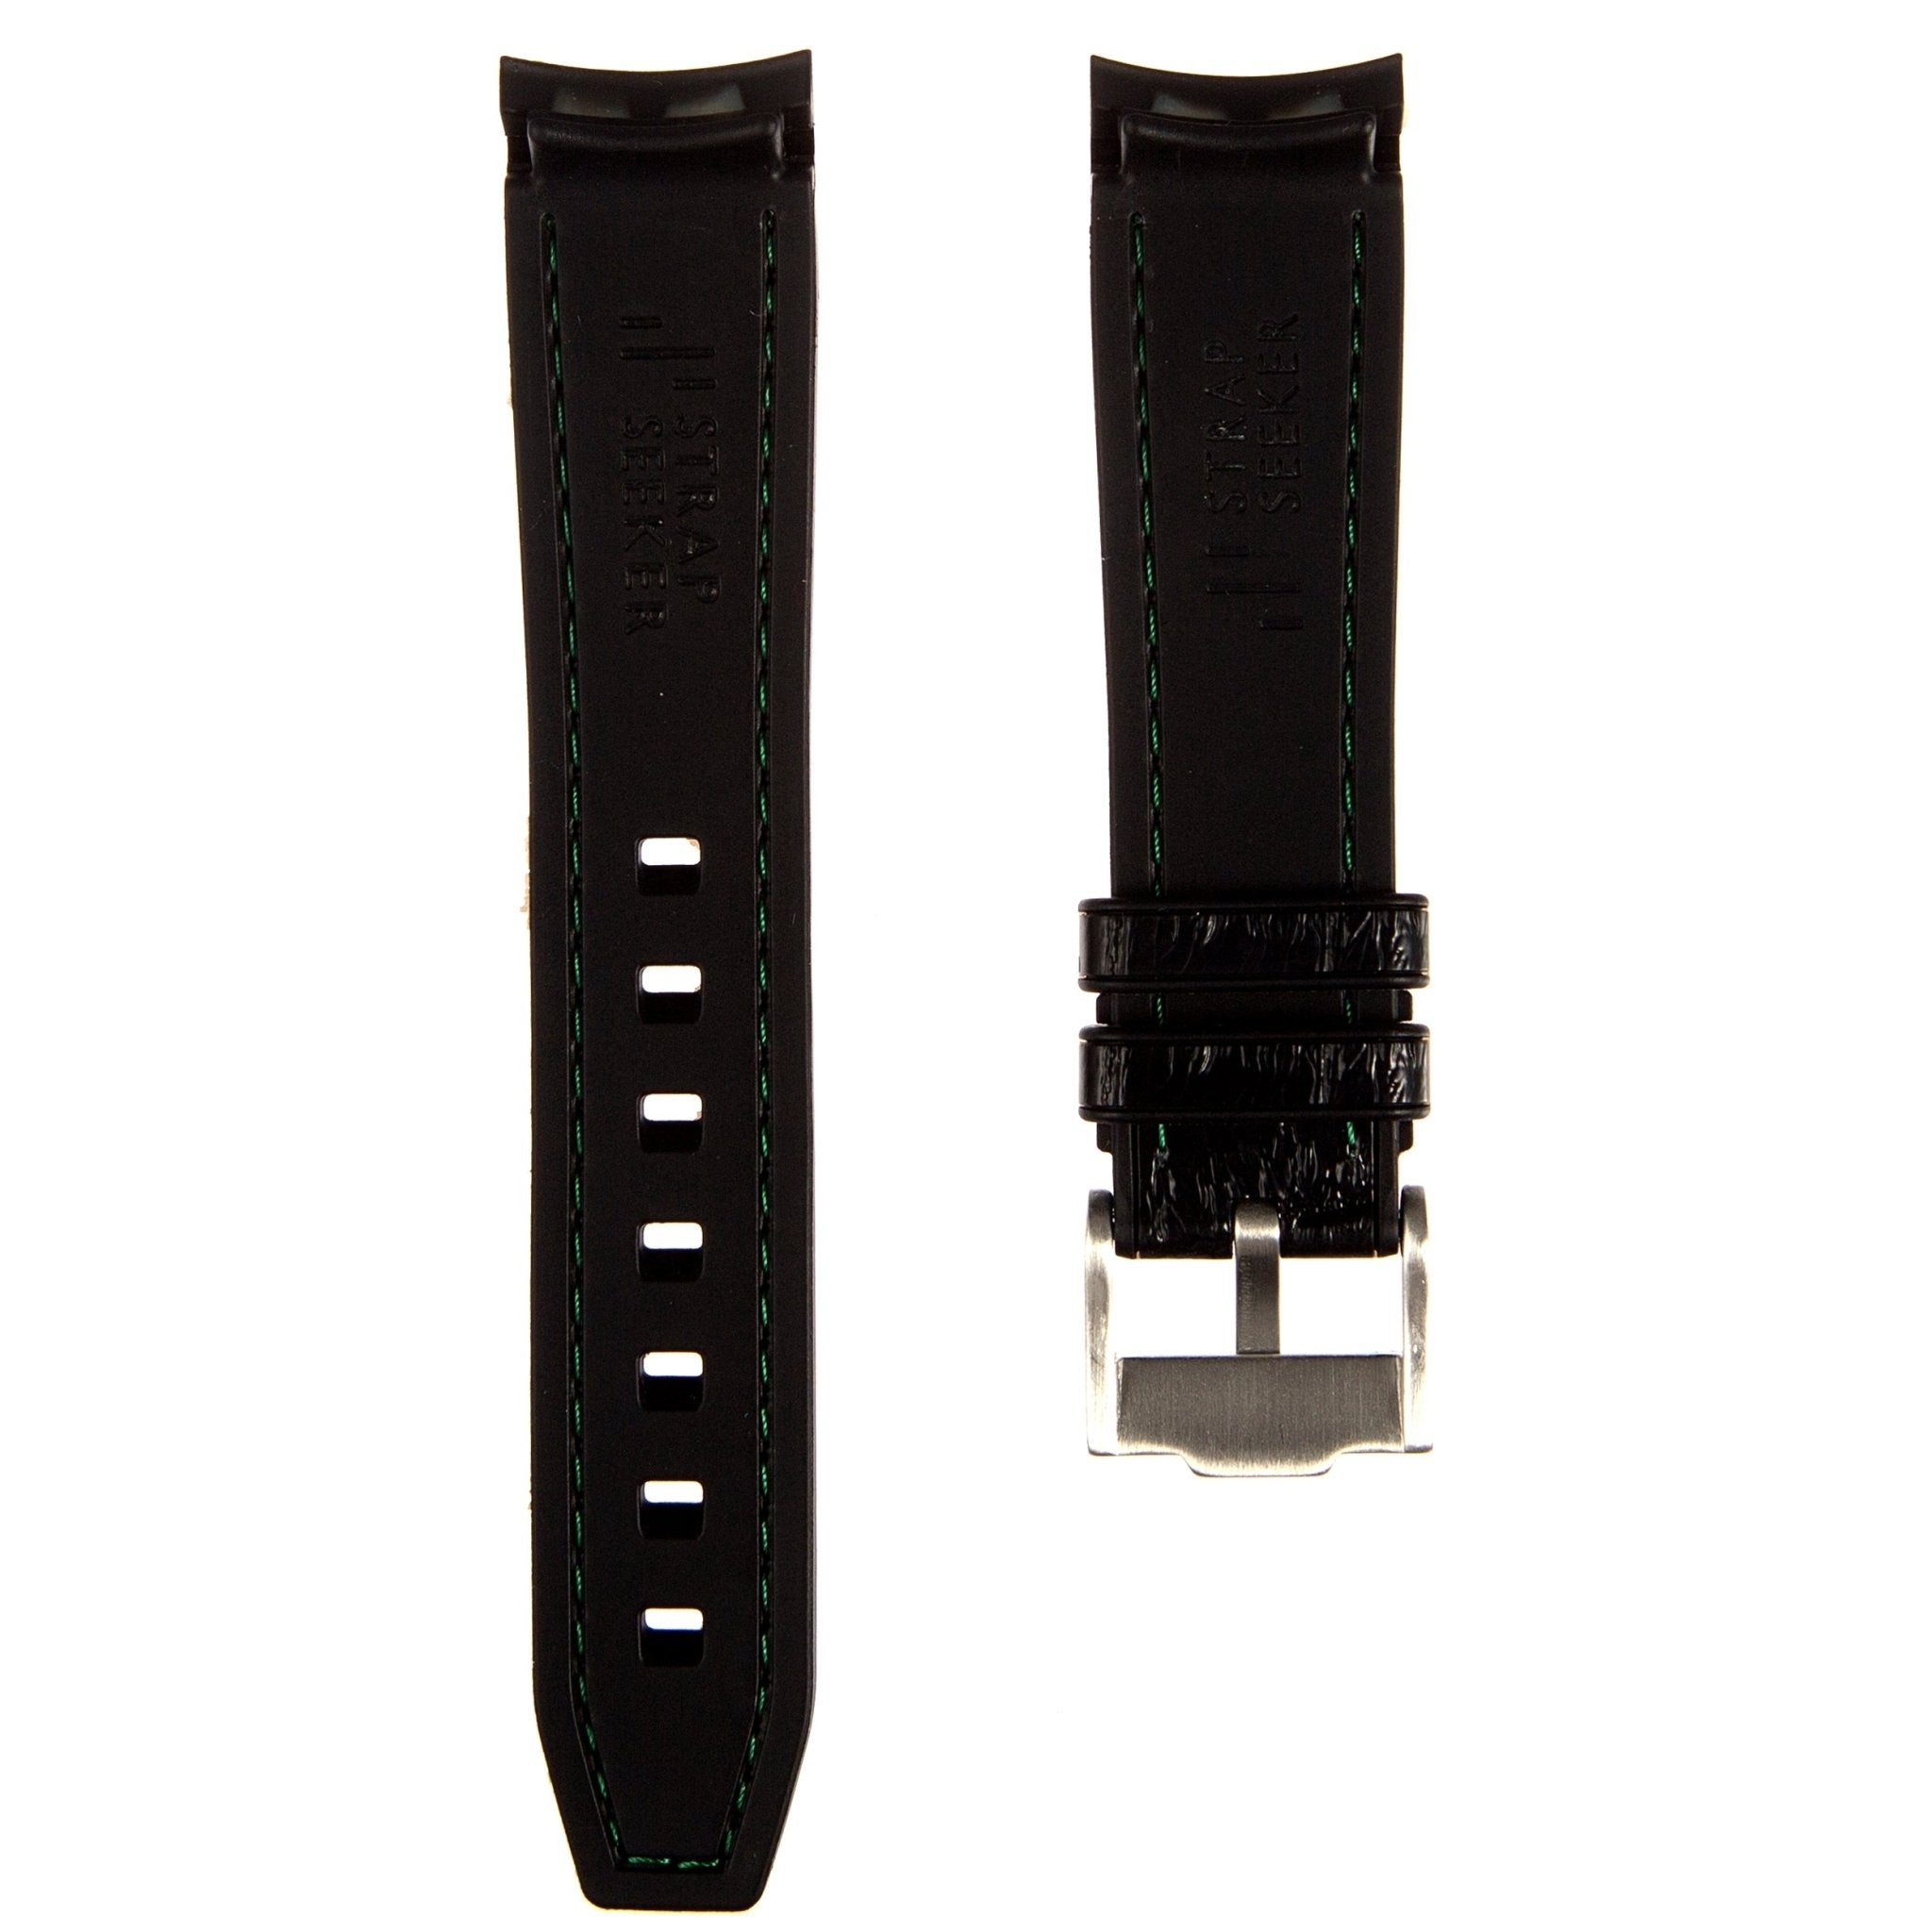 Alligator Embossed Curved End Premium Silicone Strap - Black with Green Stitch (2406) -StrapSeeker